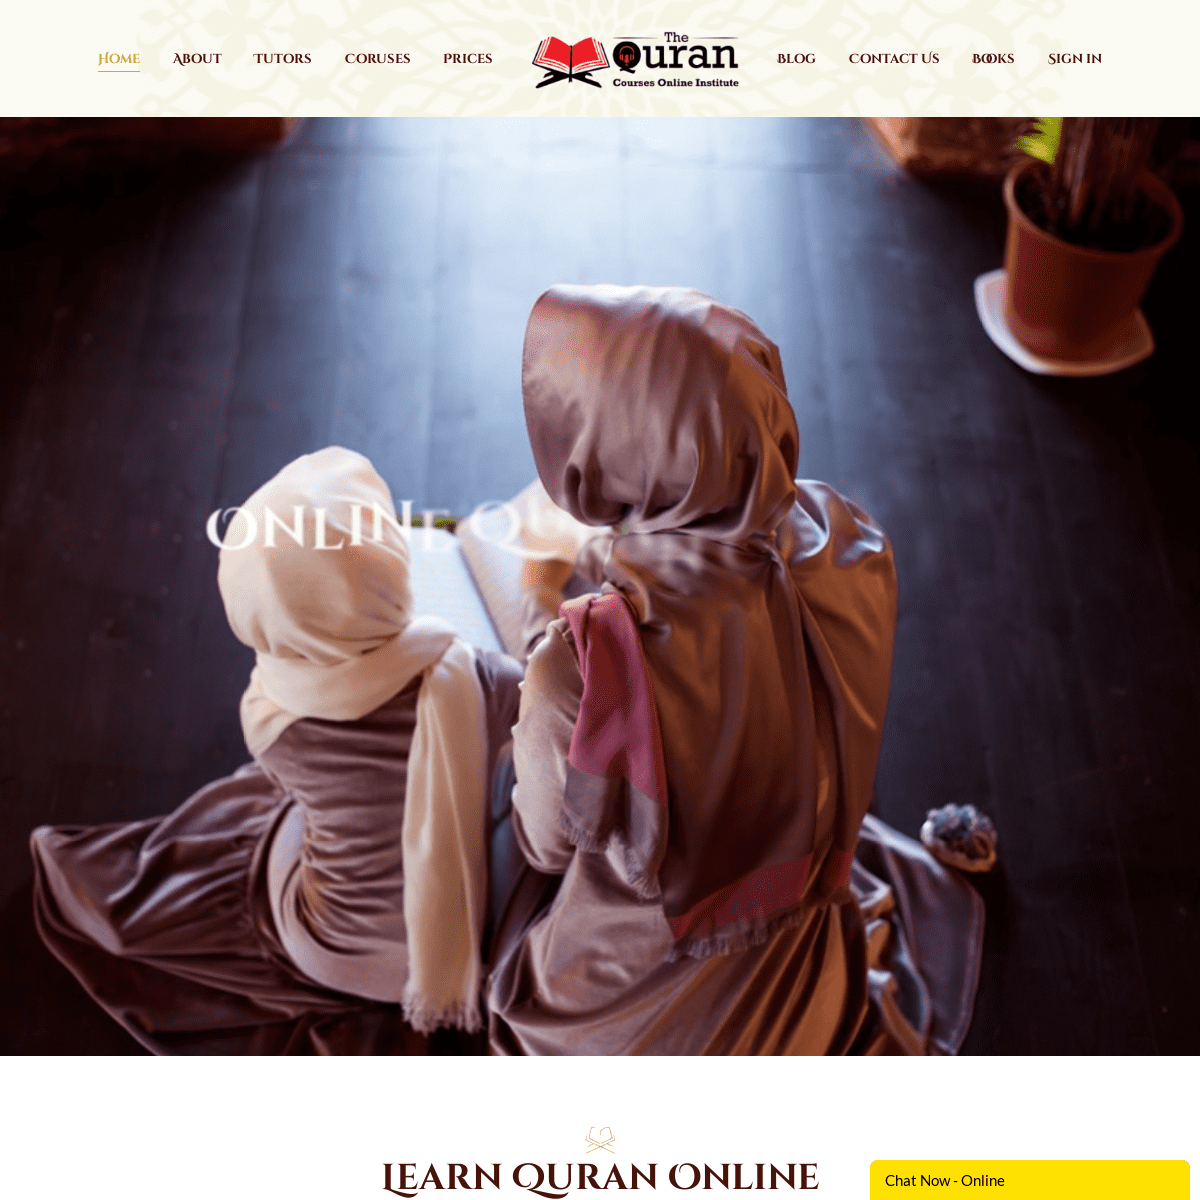  Learn Quran Online | JOIN FREE FOR A MONTH  